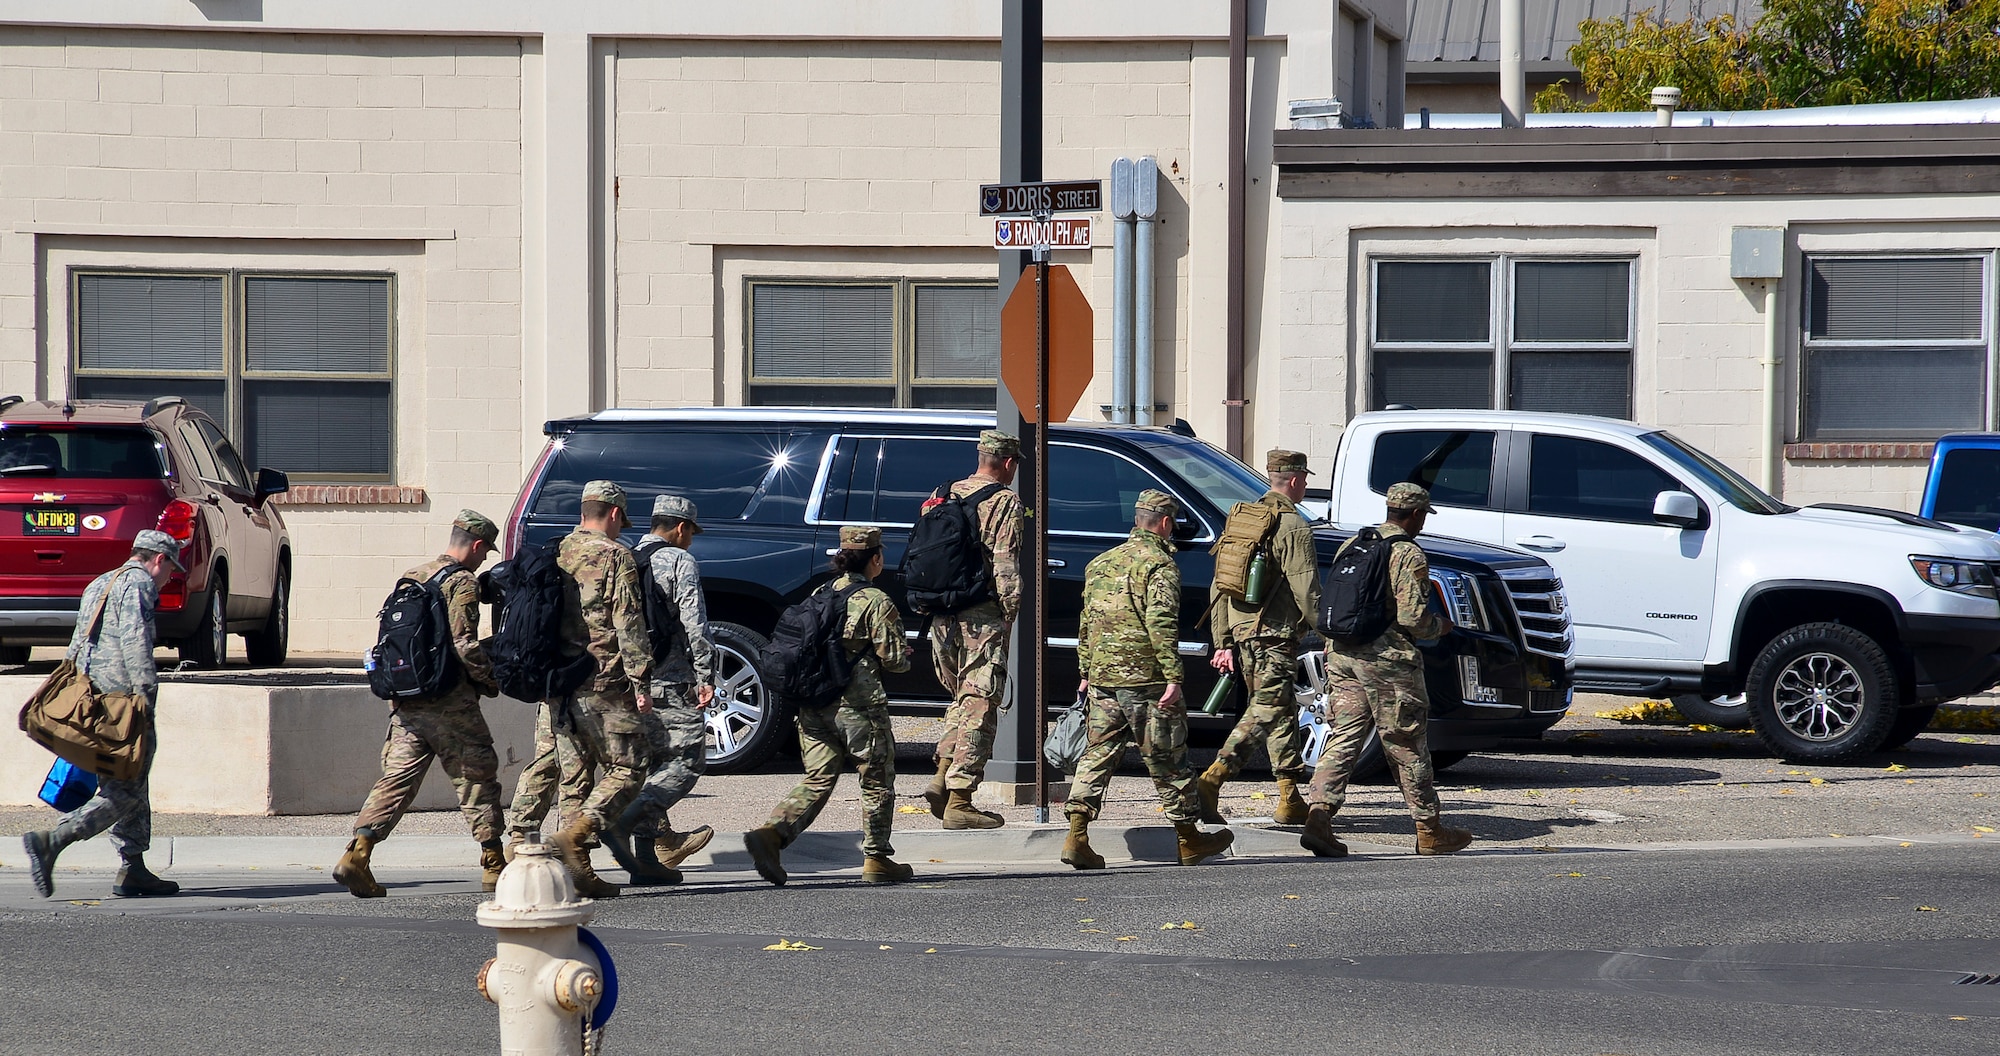 Members of Team Kirtland make their way to the mass deployment facility during exercise Global Thunder 20 at Kirtland Air Force Base, N.M., Oct. 24, 2019. Global Thunder is an annual U.S. Strategic Command exercise designed to provide training opportunities to test and validate nuclear command, control and operational procedures. (U.S. Air Force photo by Staff Sgt. Kimberly Nagle)